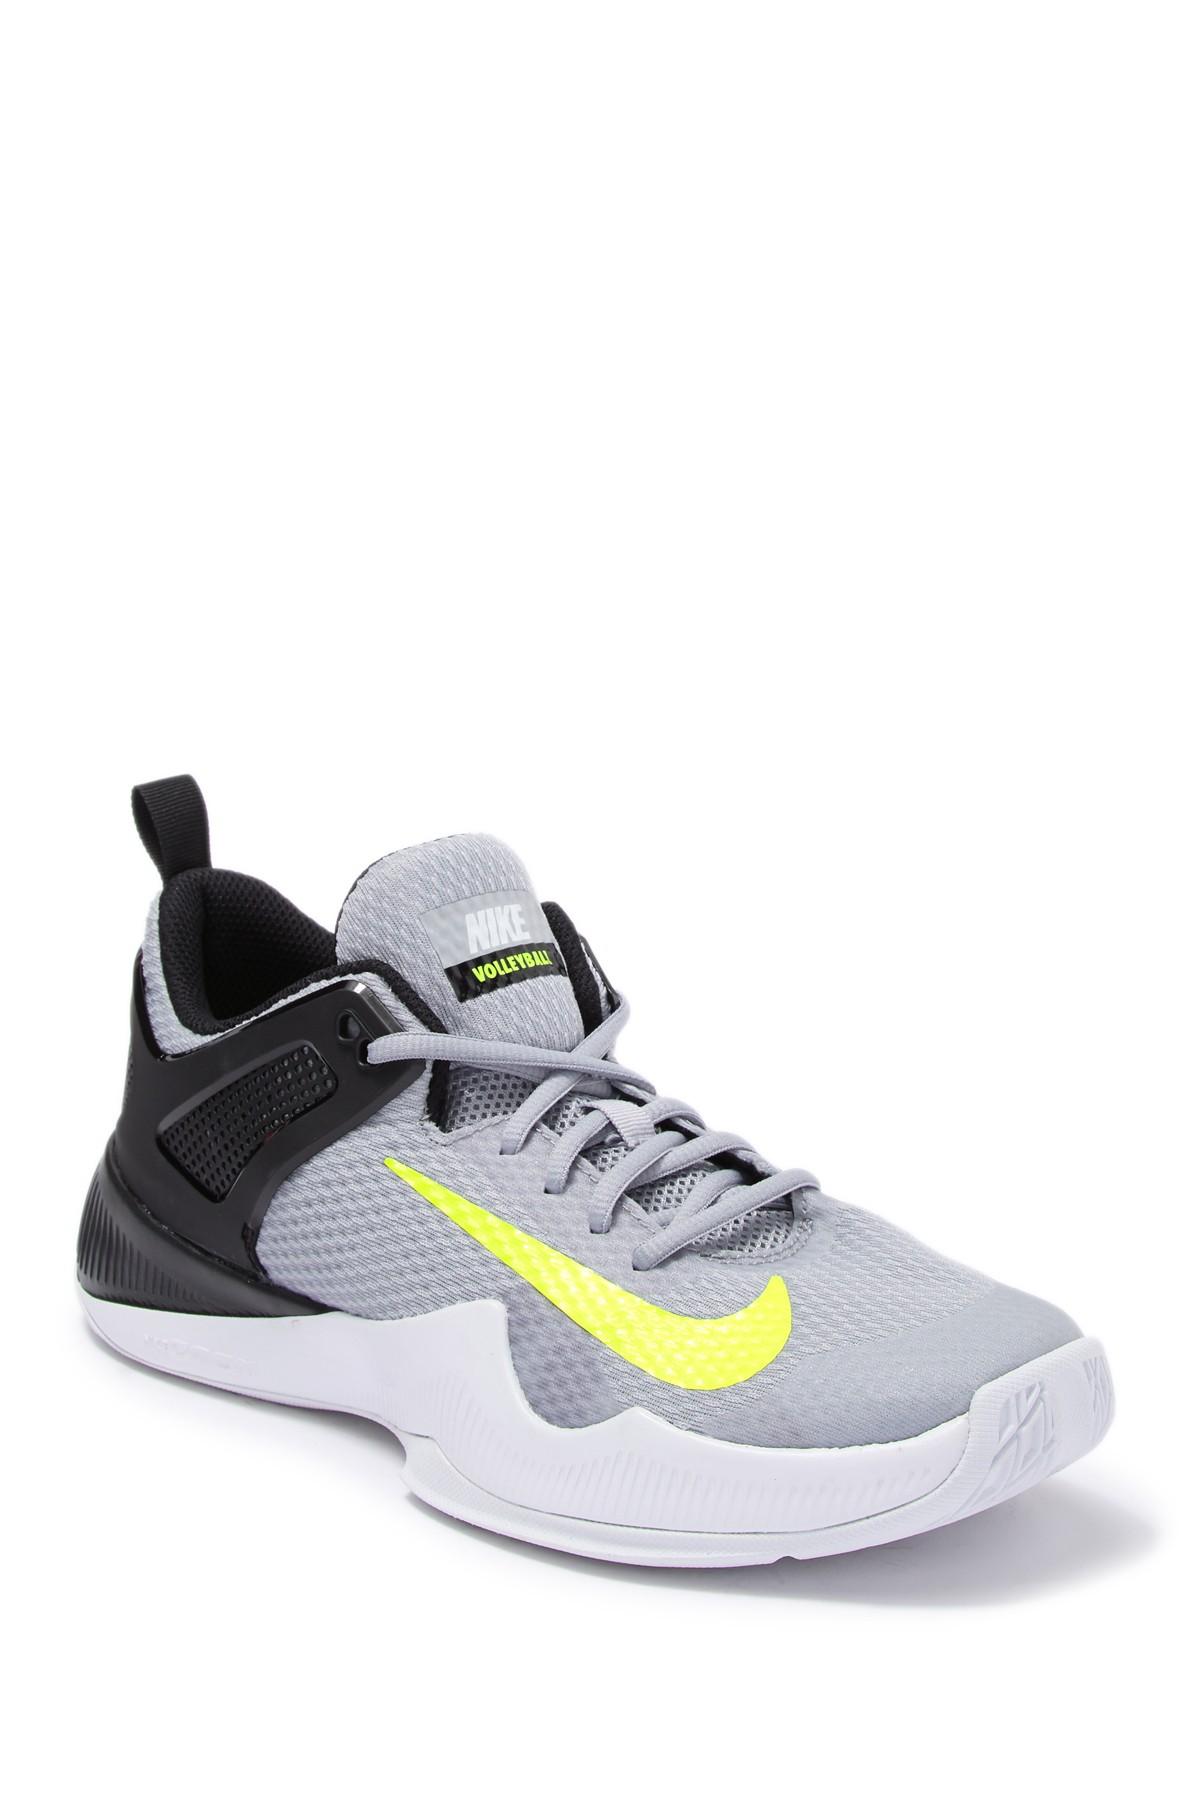 Nike Synthetic Air Zoom Hyperattack Volleyball Shoe in Gray - Lyst